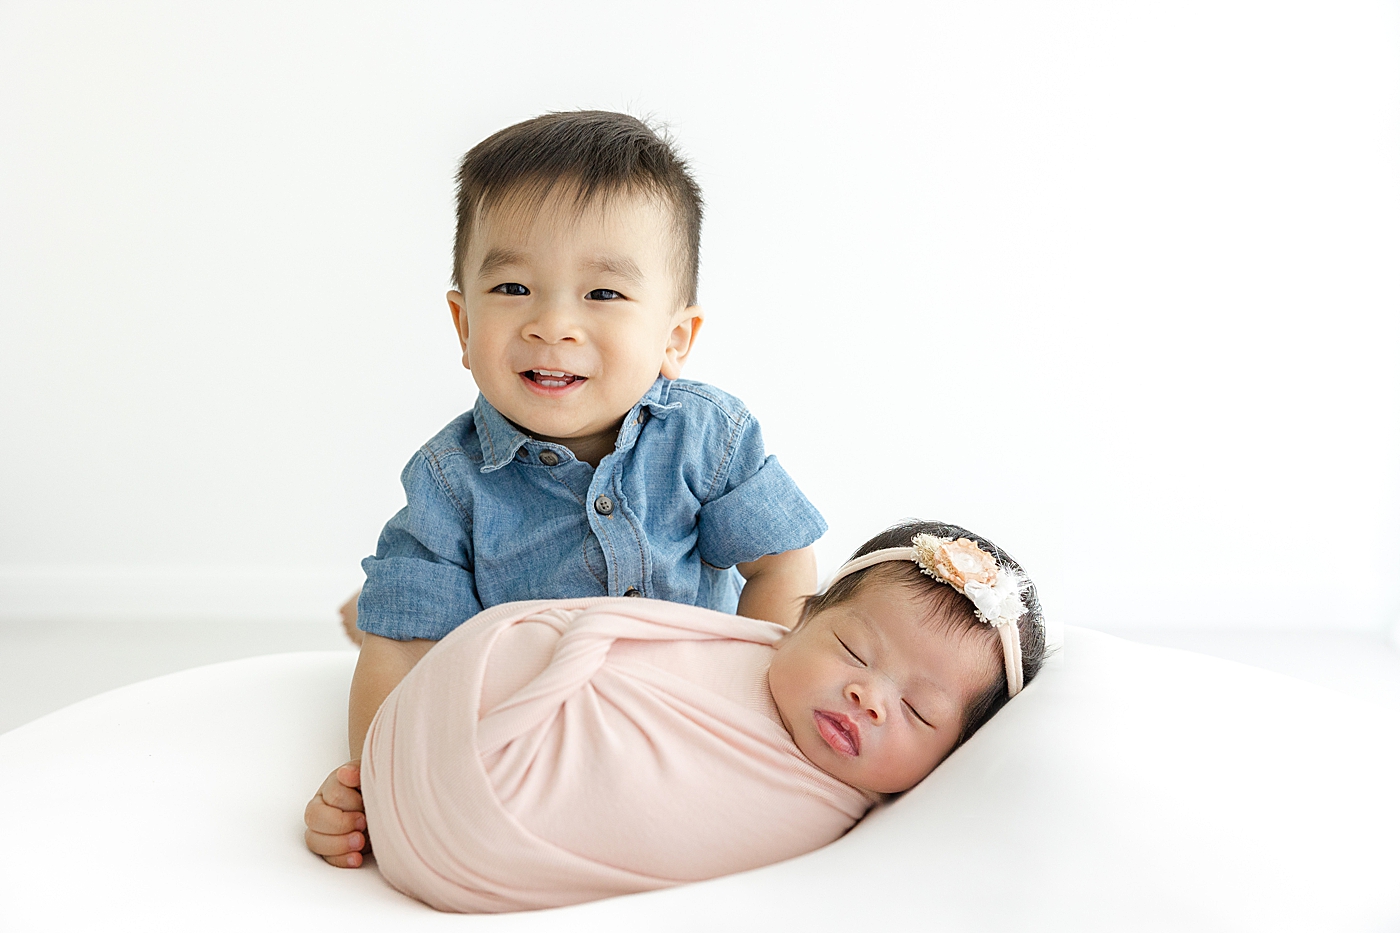 Big brother smiling with his newborn baby sister | Image by Sana Ahmed